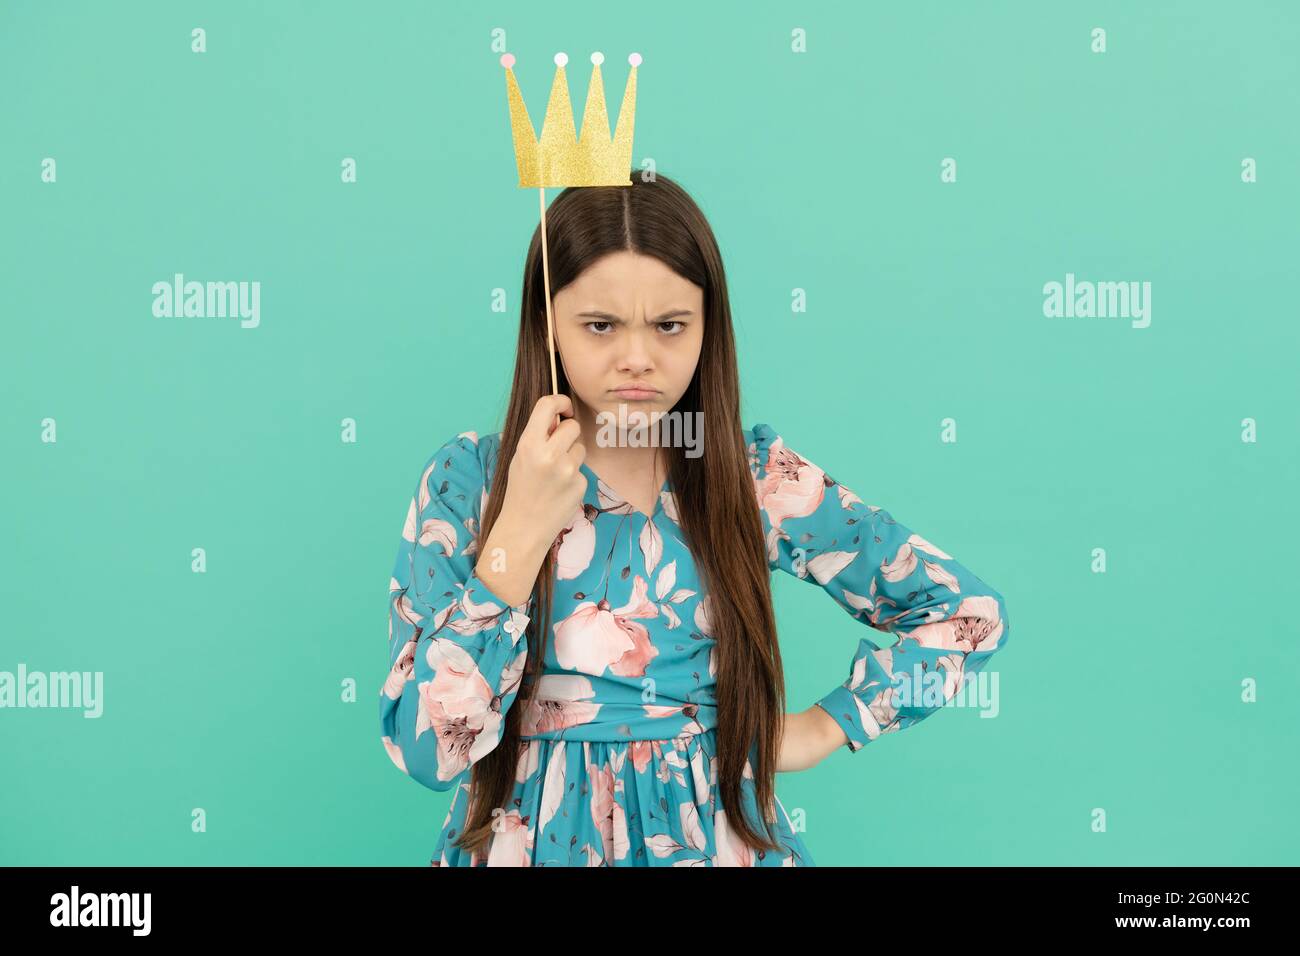 Angry selfish girl hold booth crown over head keeping arm akimbo blue background, egoist Stock Photo